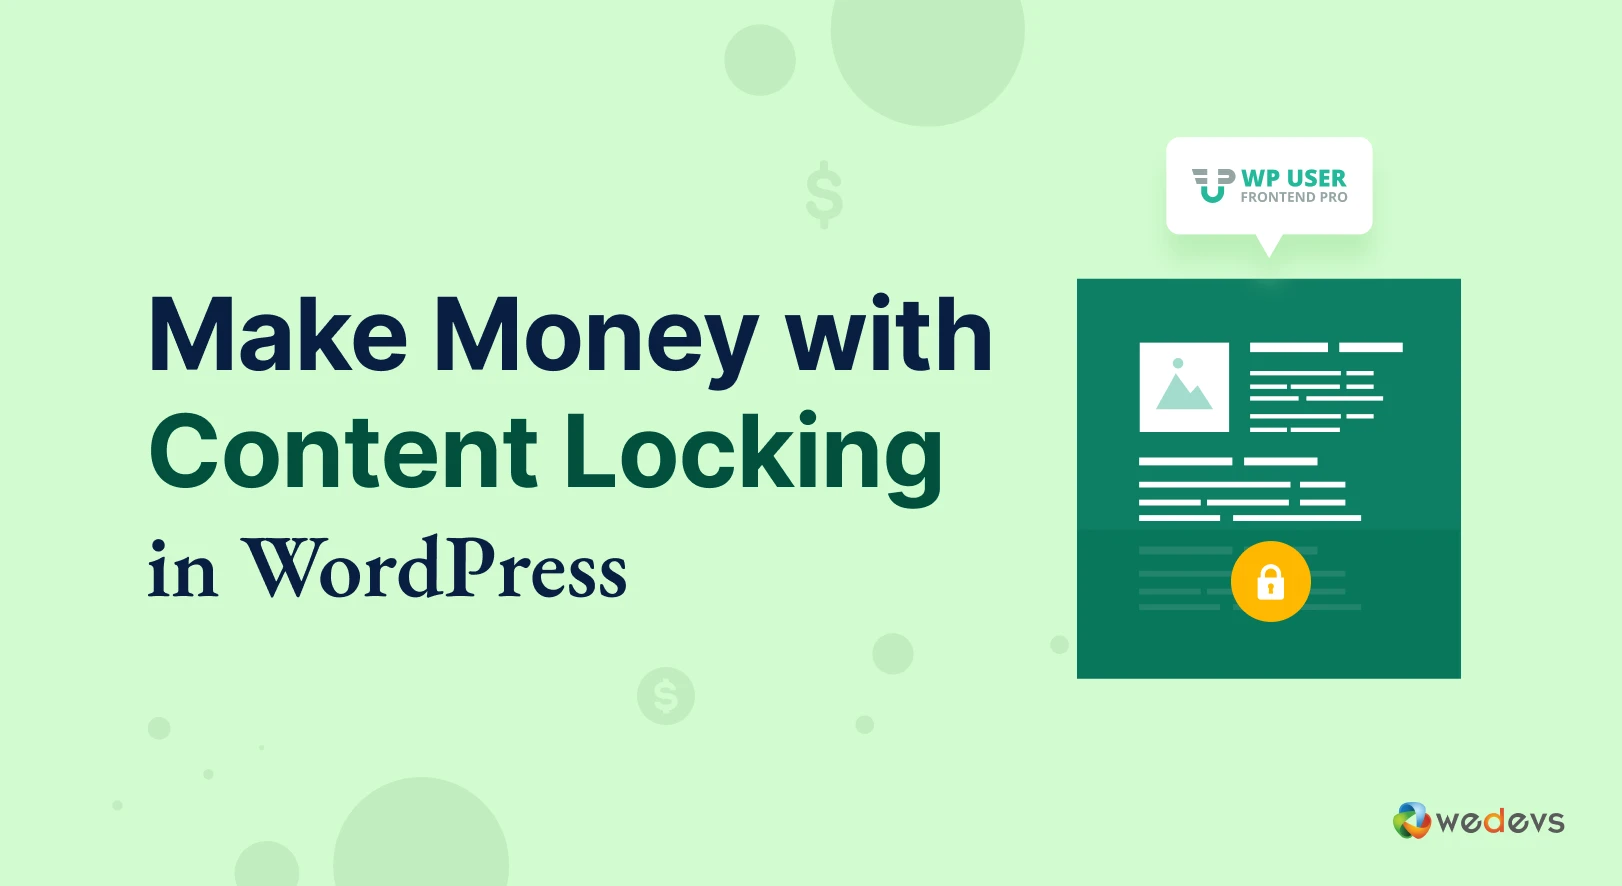 How to Make Money with Content Locking in WordPress